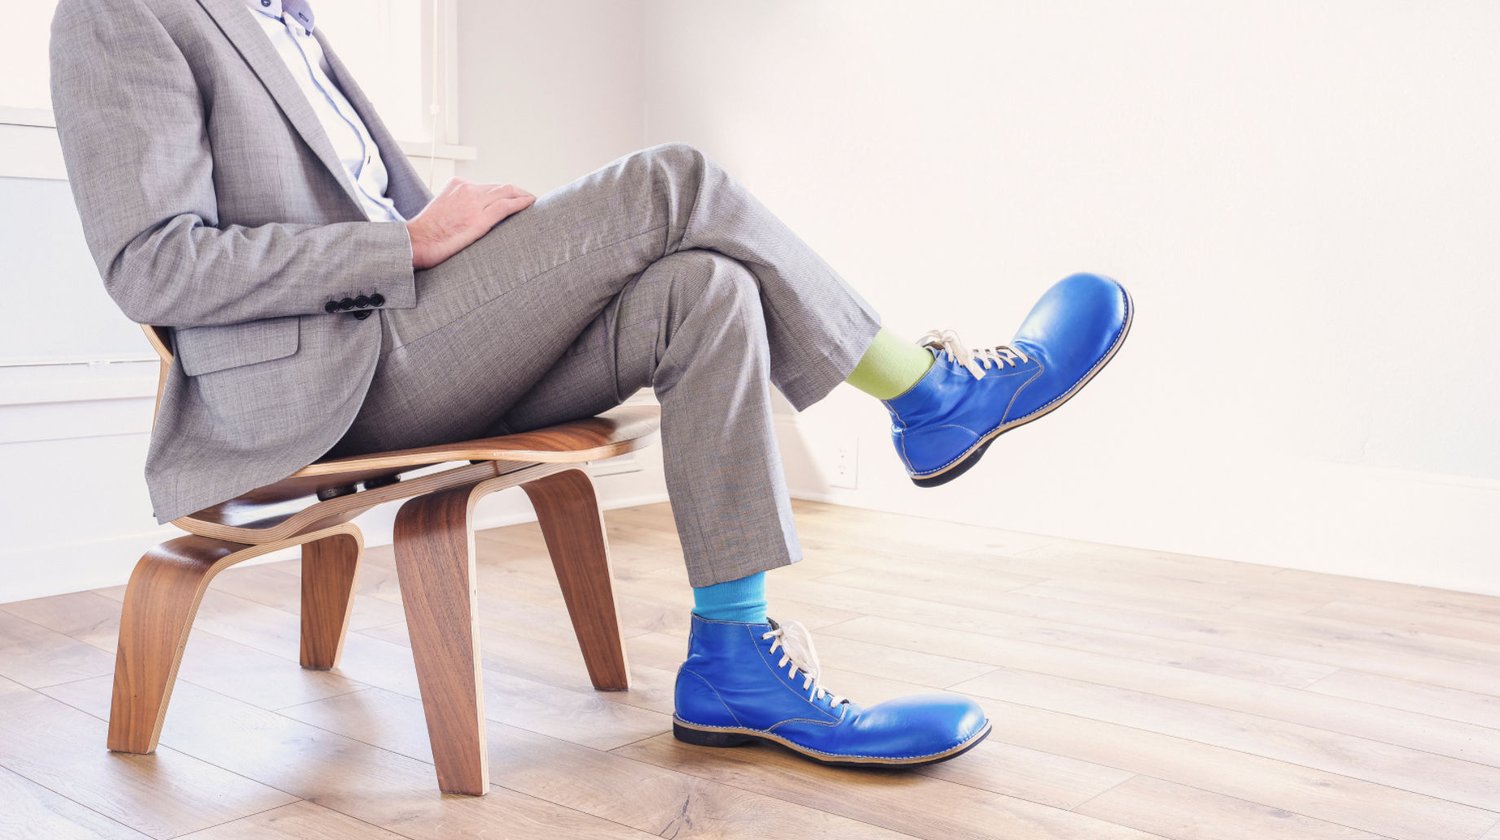 Business man sitting in grey suit and blue clown shoes